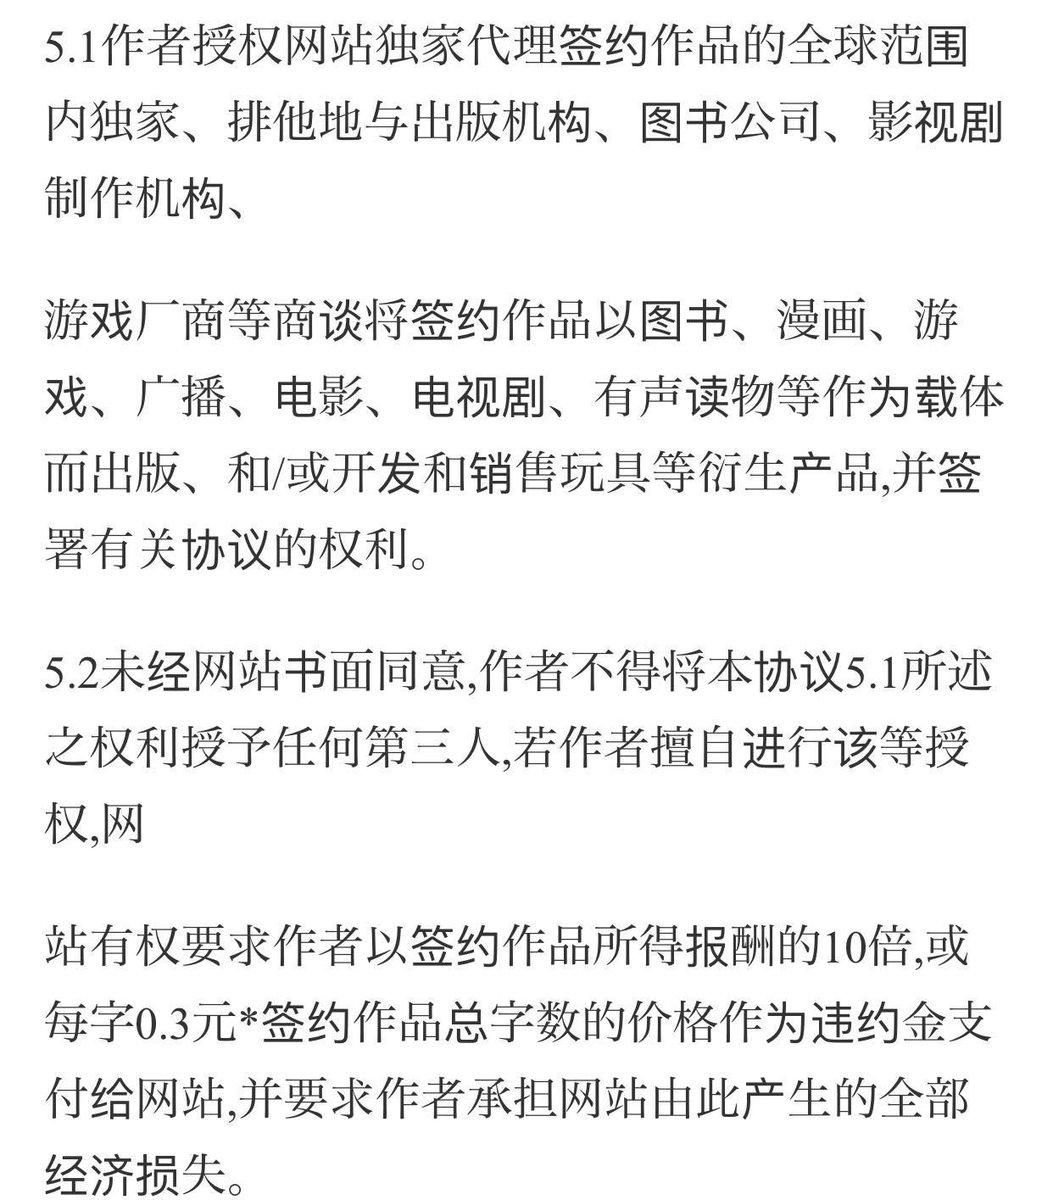 2/4Idk if TGCF/HOB is published under the same company or not, so whether this is true or not, I have yet to confirm, but will update this thread when I find out. However, this is in fact the case for MDZS. Again, this includes the live action series The Untamed/Chen Qing Ling.